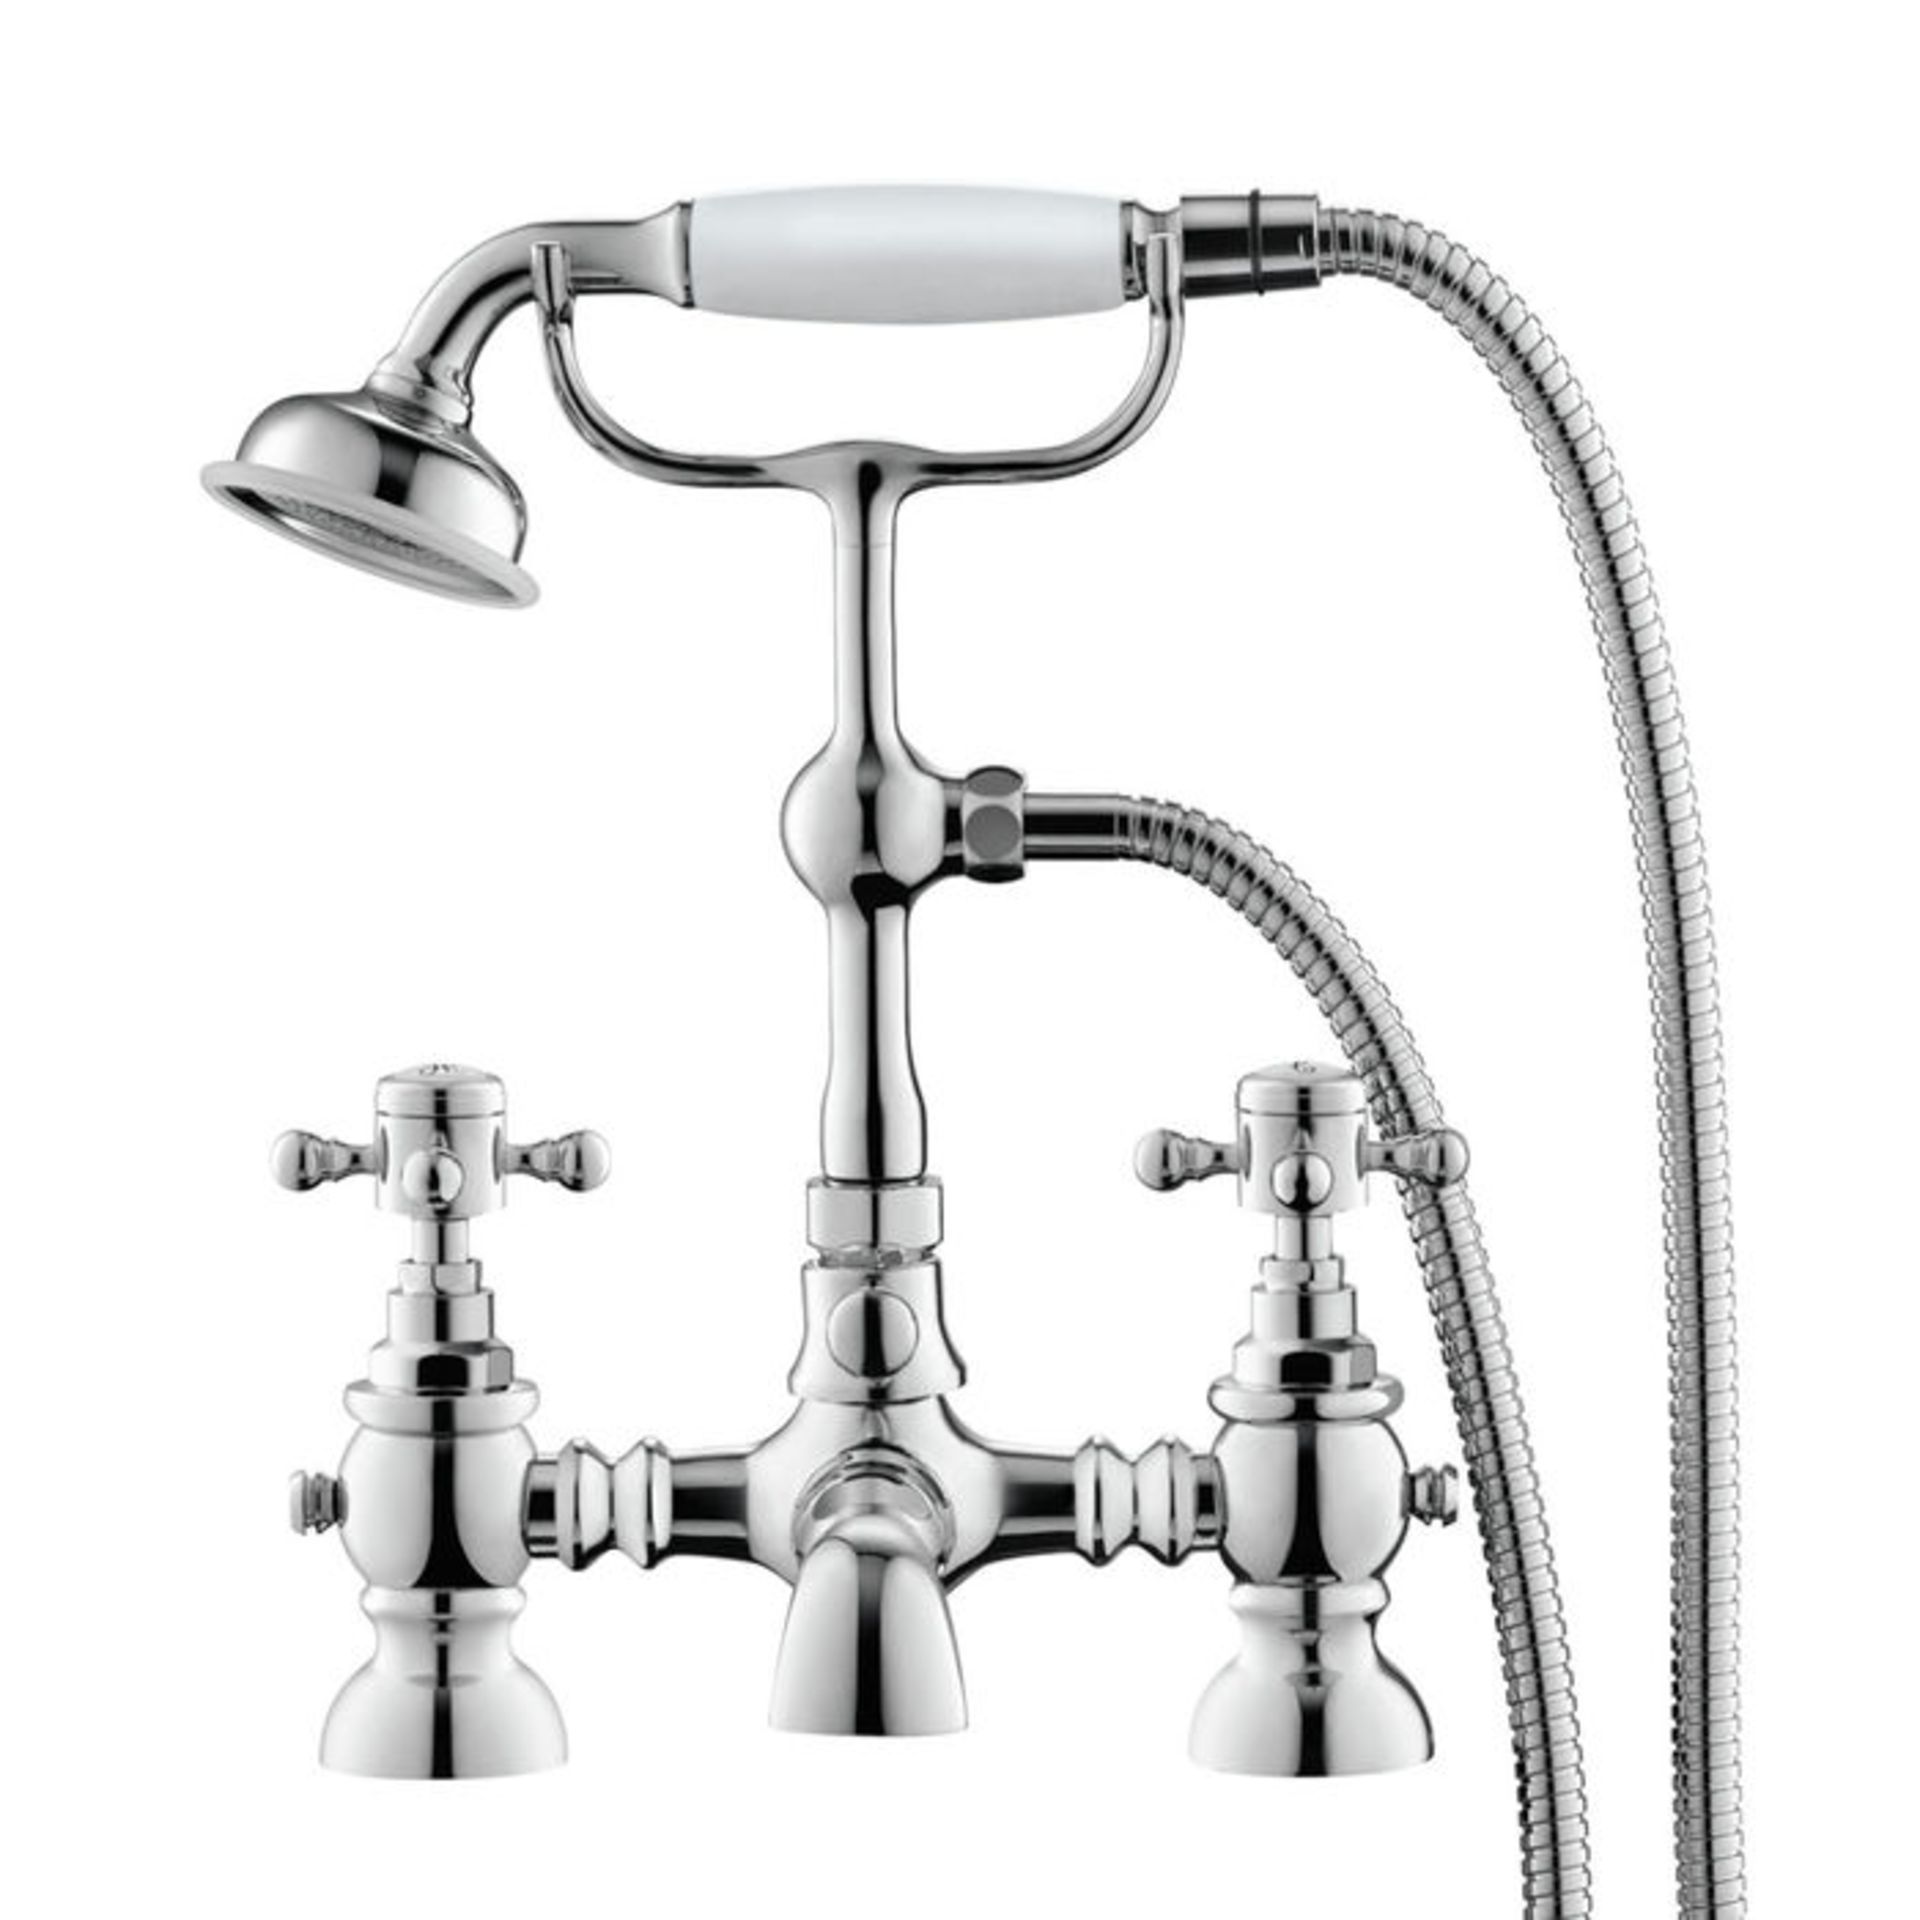 (AH30) Cambridge Bath Shower Mixer - Traditional Tap with Hand Held Shower. We love this because - Image 2 of 3